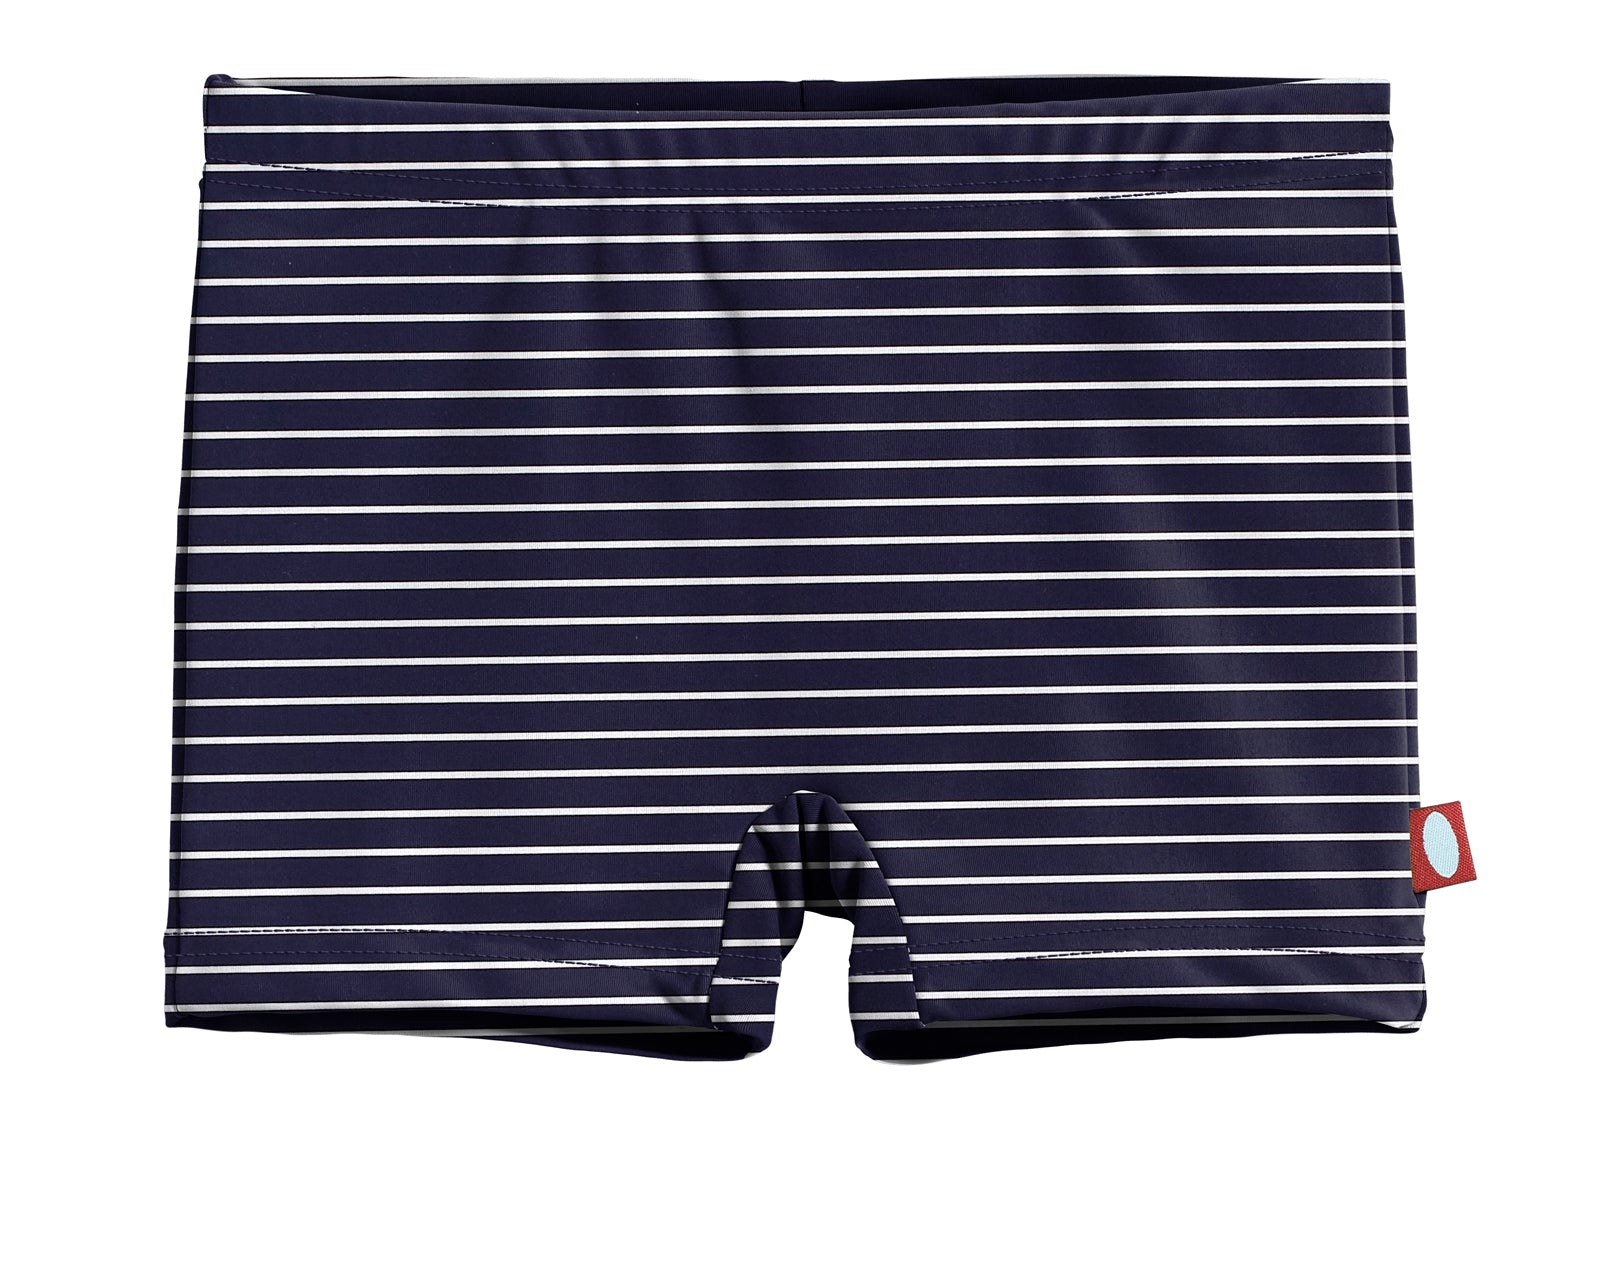 Buy White Pink Stripe Cotton Block Print Shorts for Best Price, Reviews,  Free Shipping